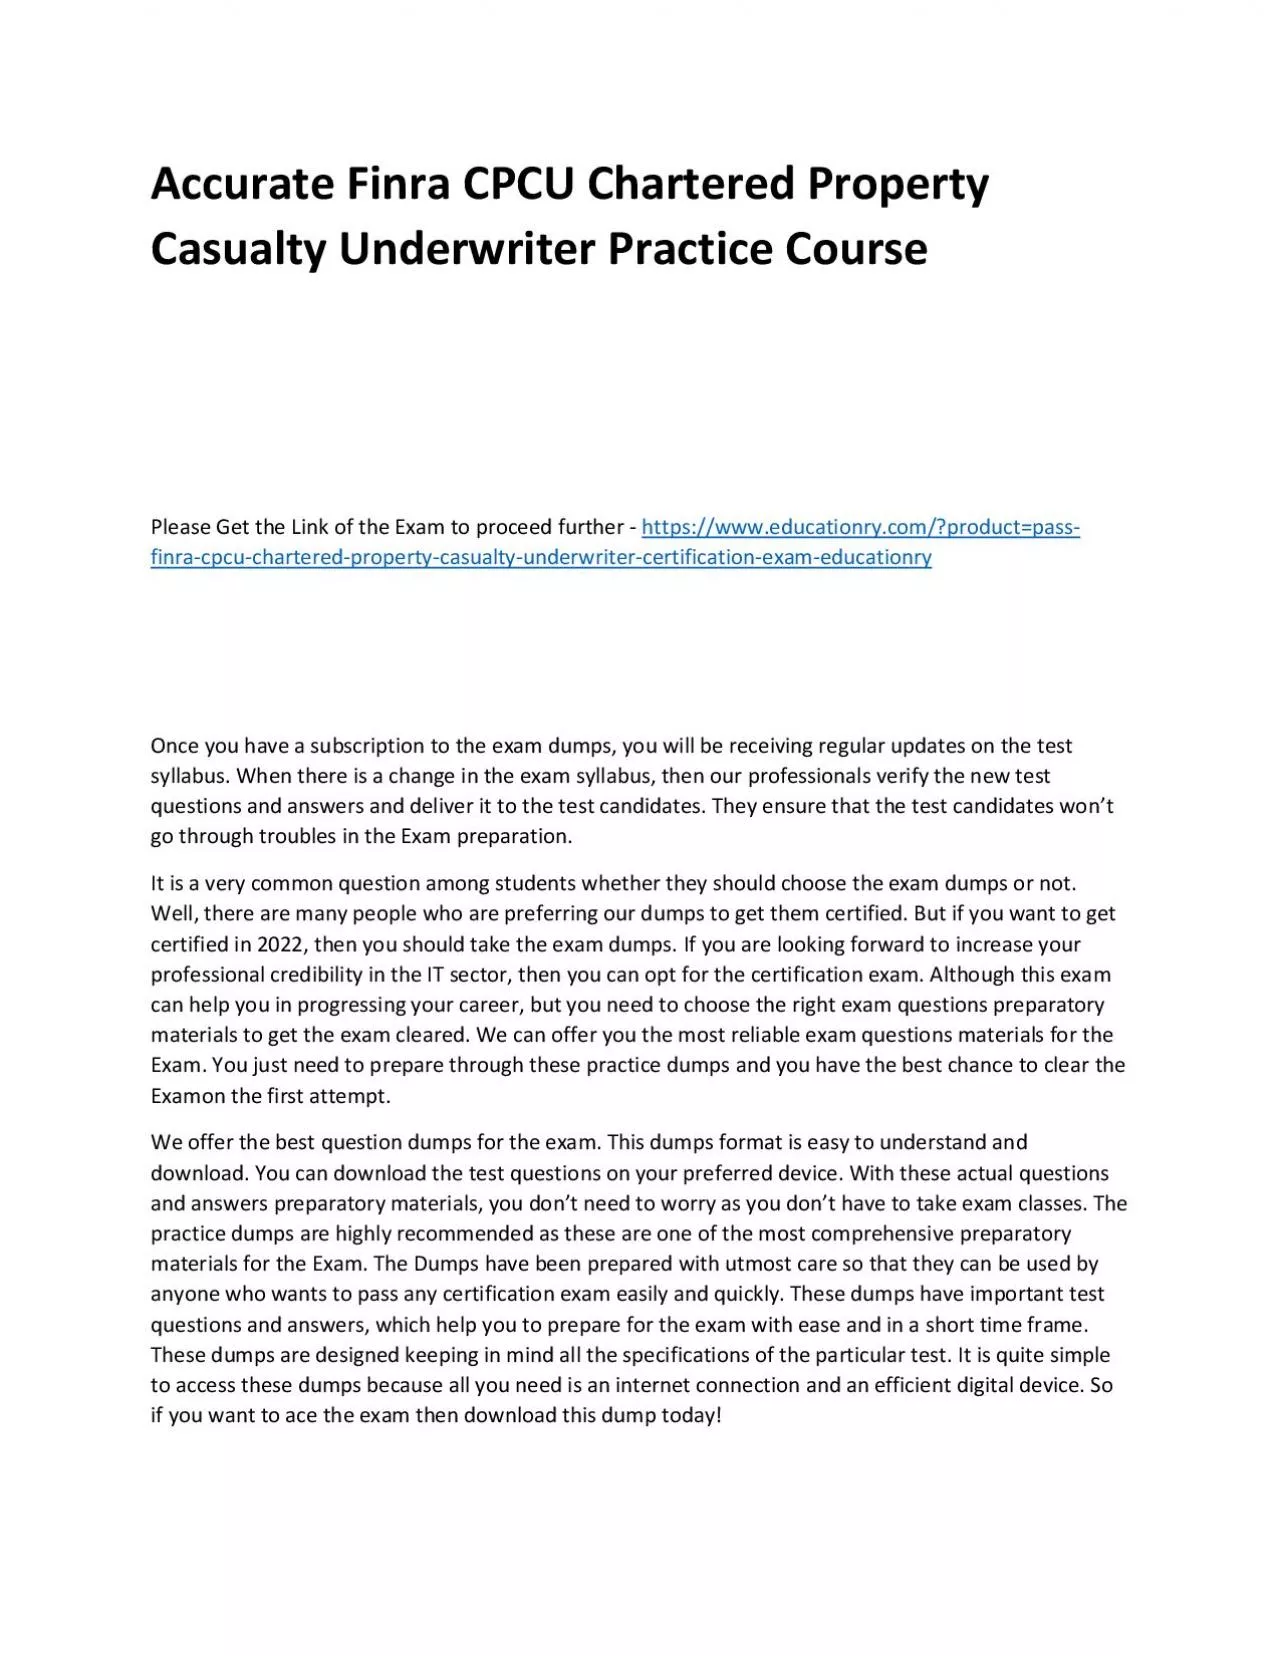 Finra CPCU Chartered Property Casualty Underwriter